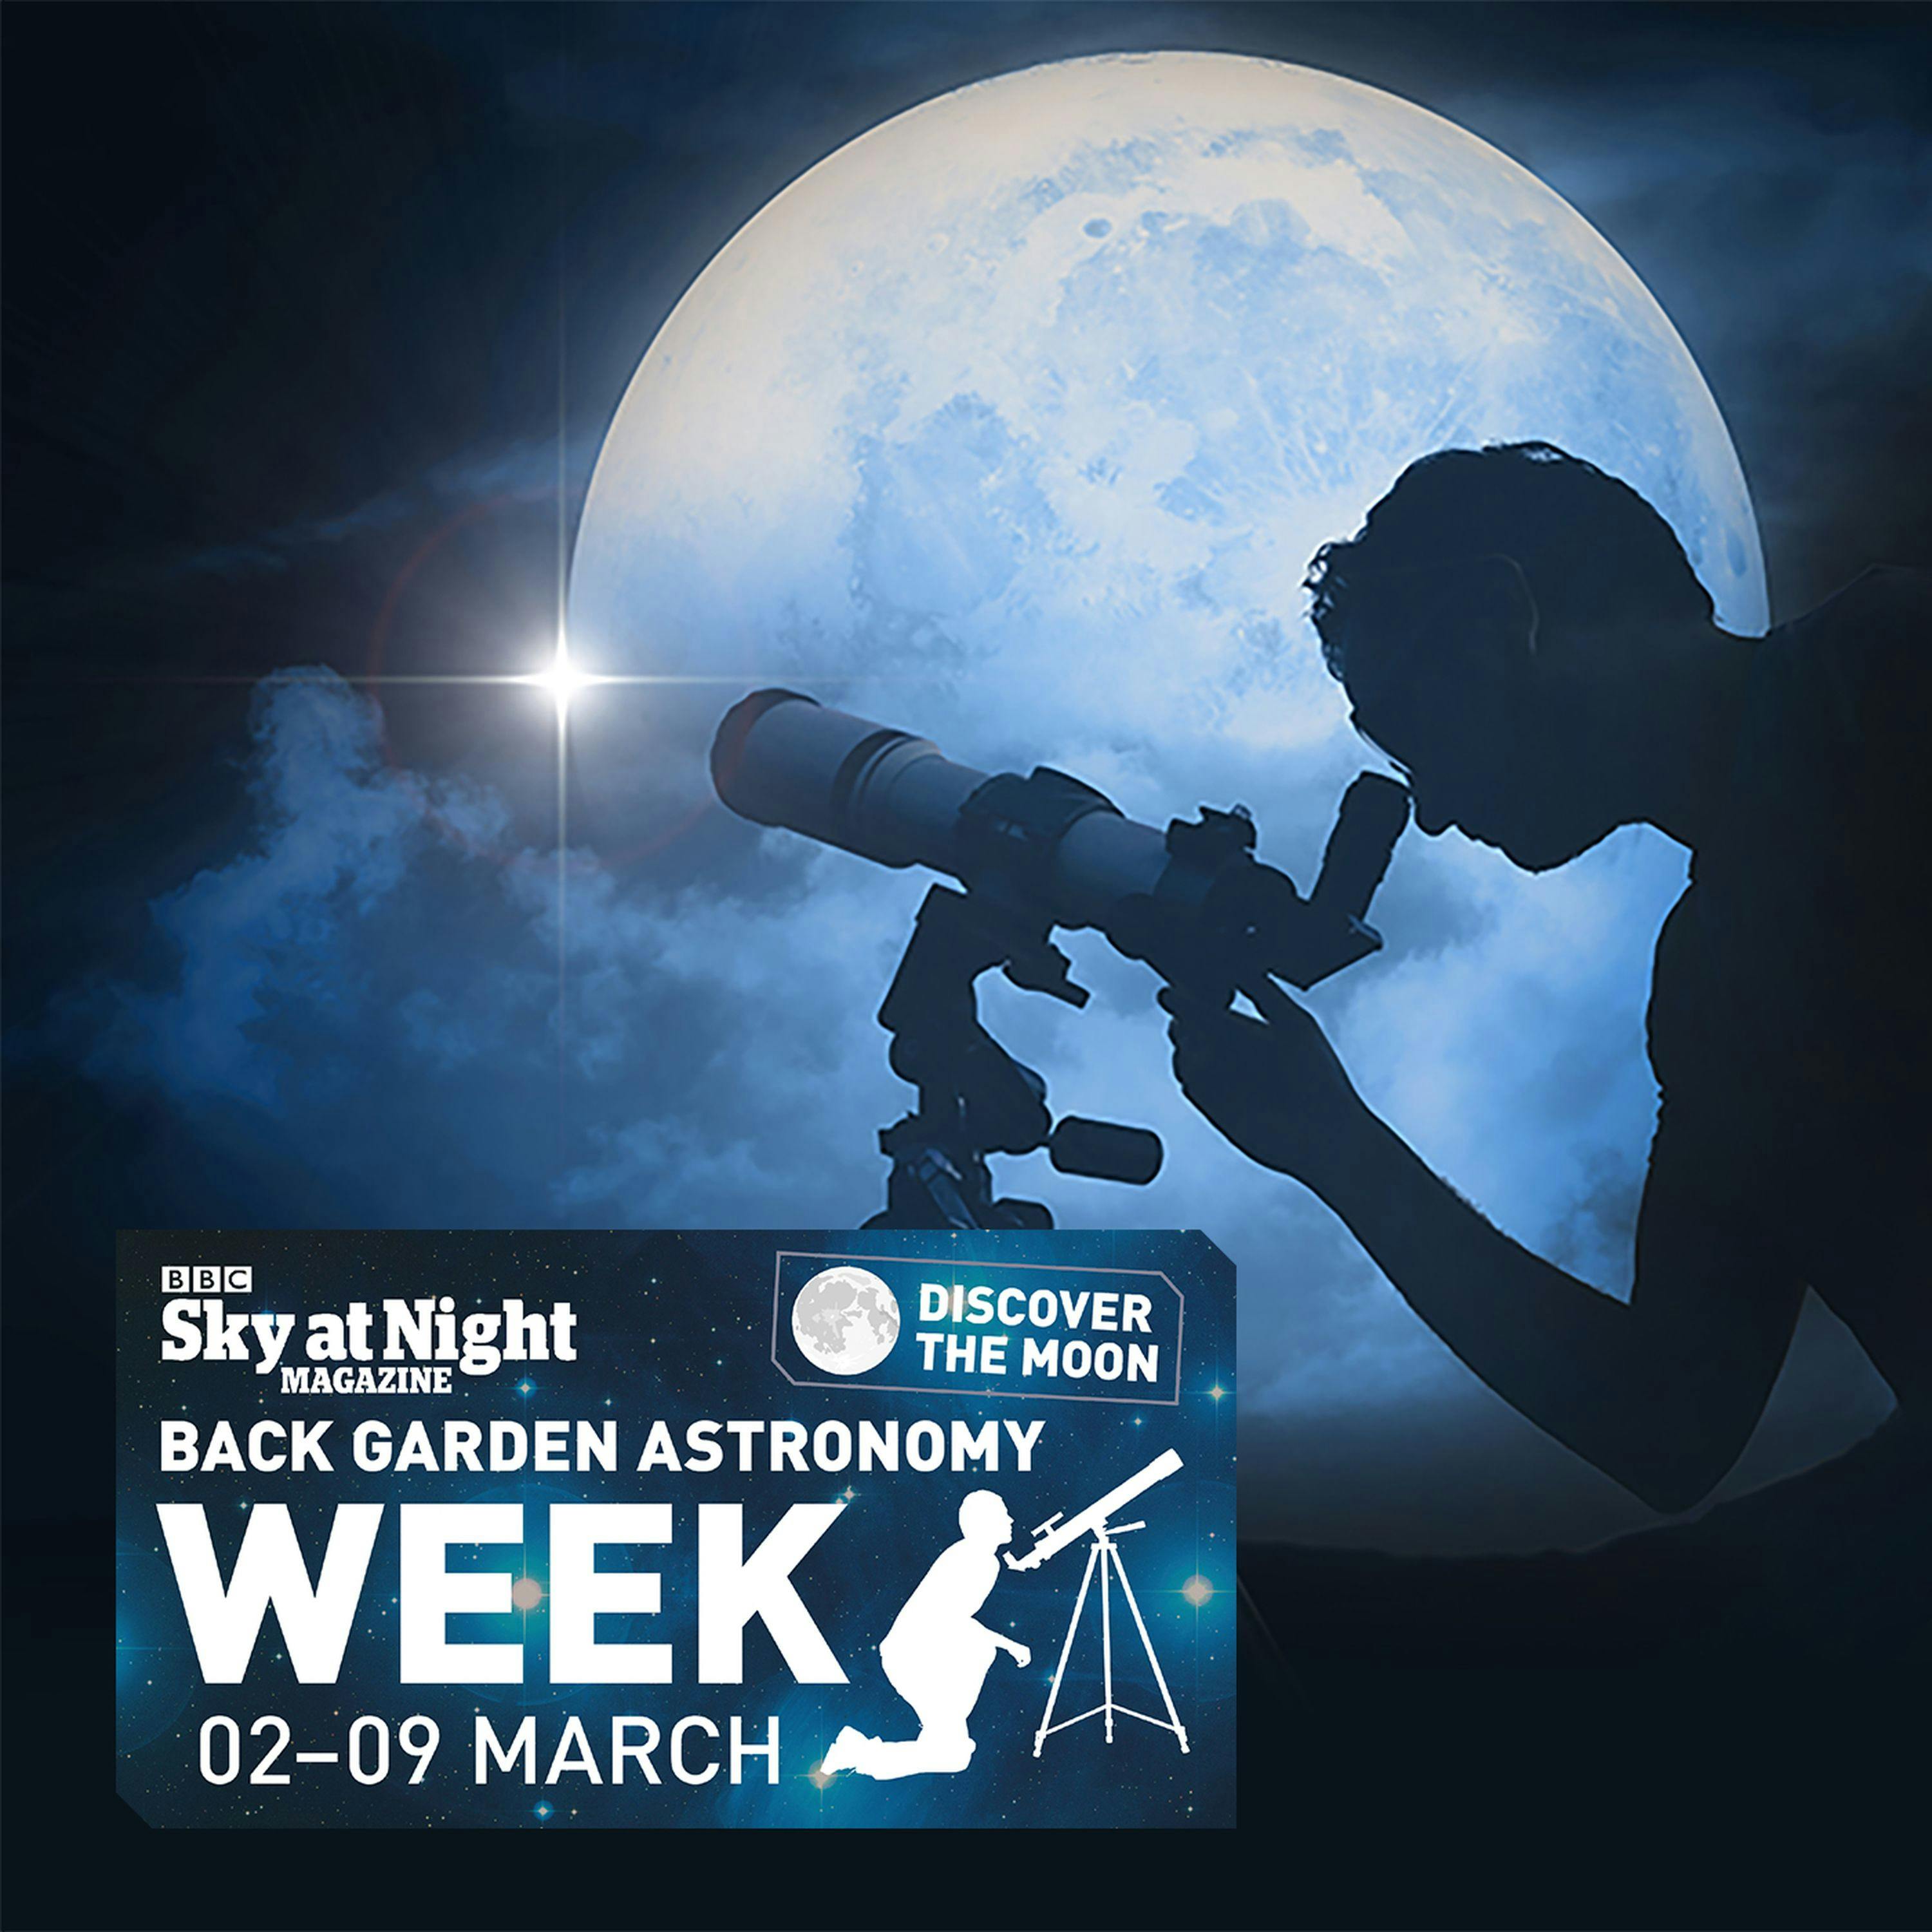 Day One – Back Garden Astronomy Week: The Moon